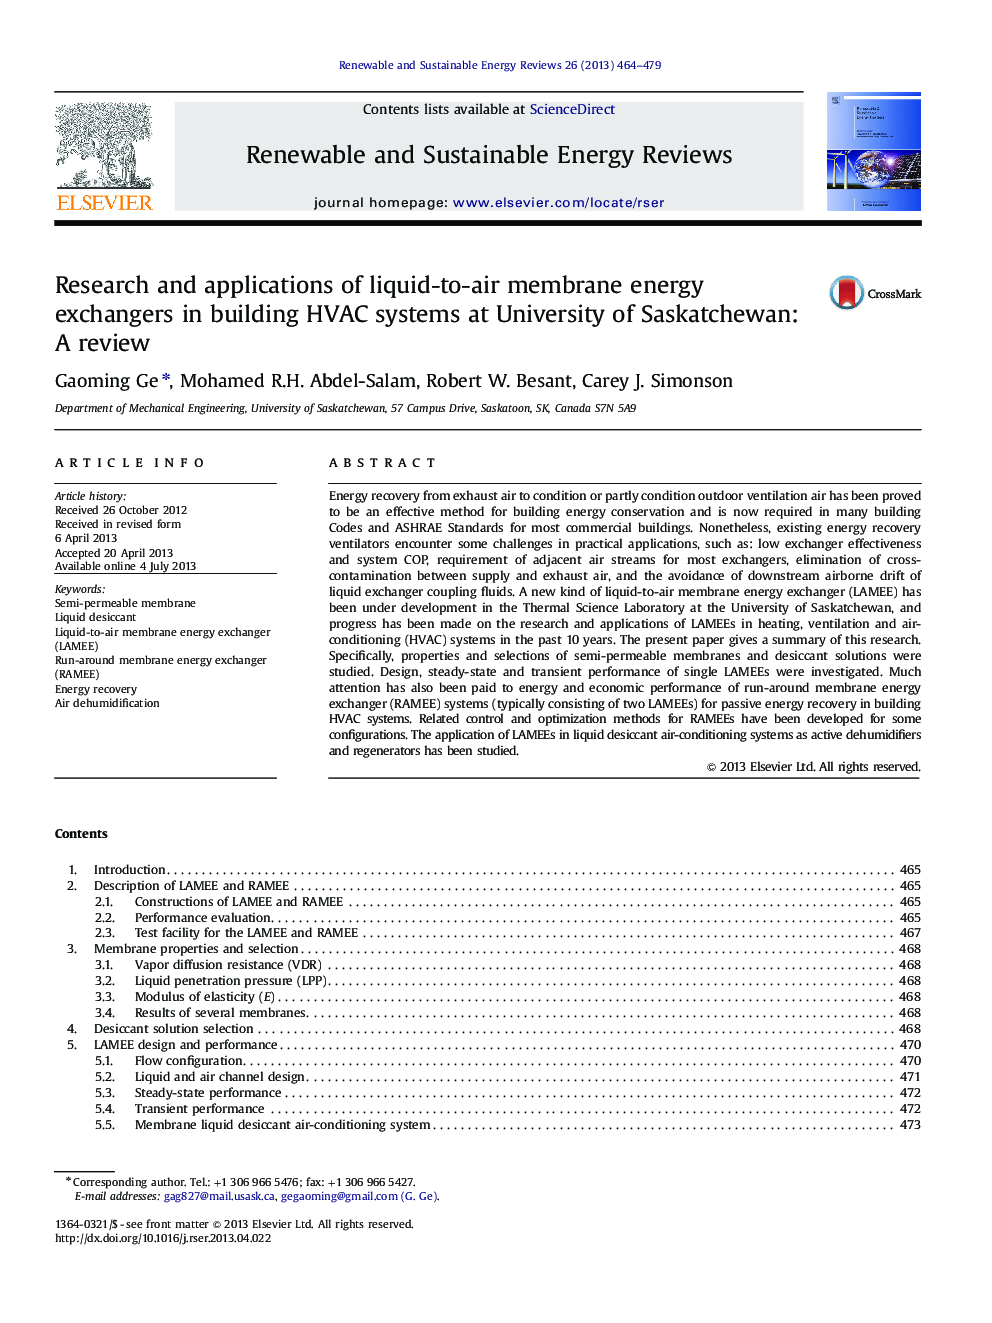 Research and applications of liquid-to-air membrane energy exchangers in building HVAC systems at University of Saskatchewan: A review